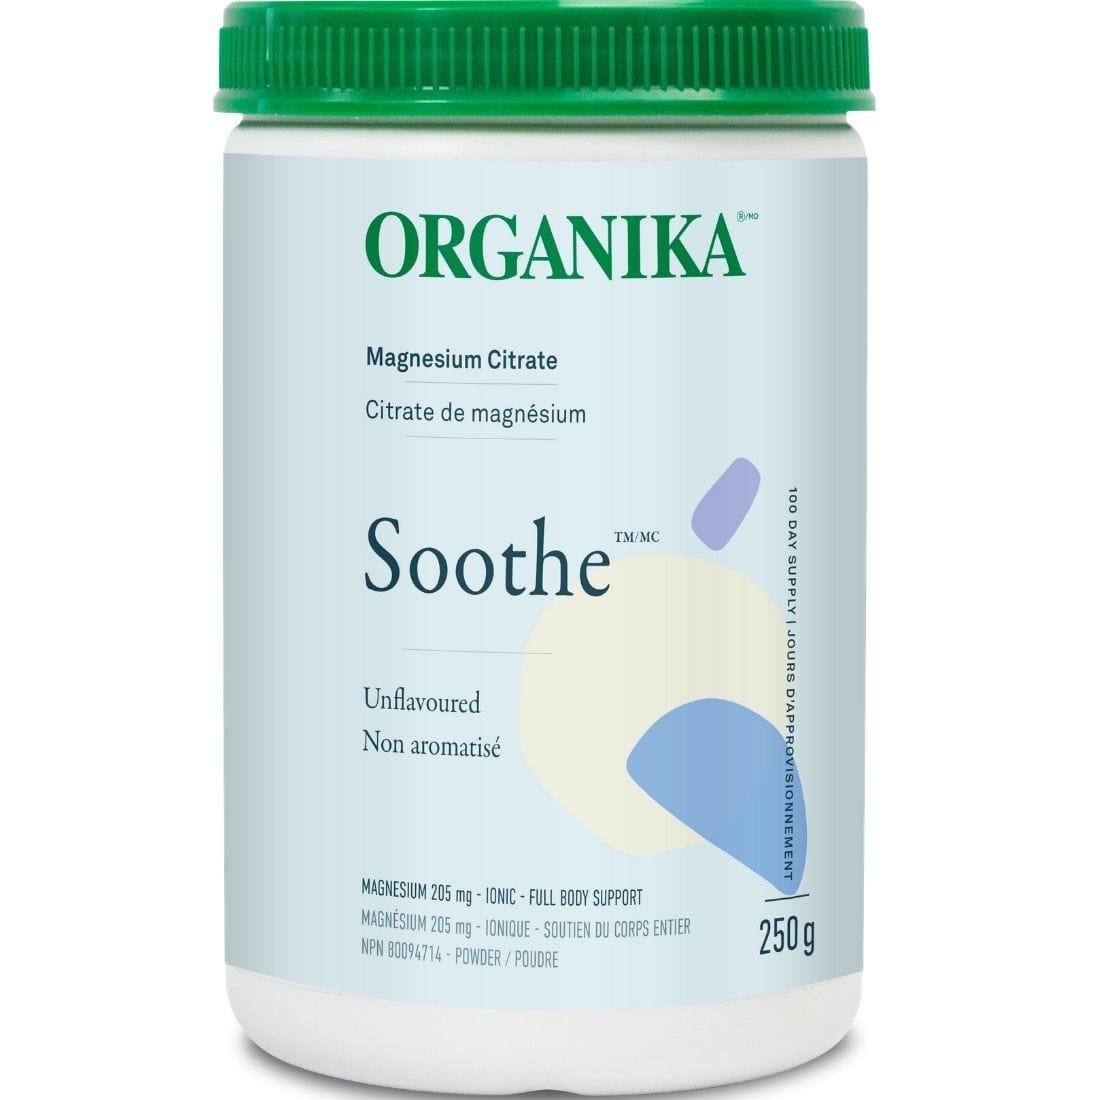 Organika Soothe Magnesium Citrate 205mg (Ionic), 250g